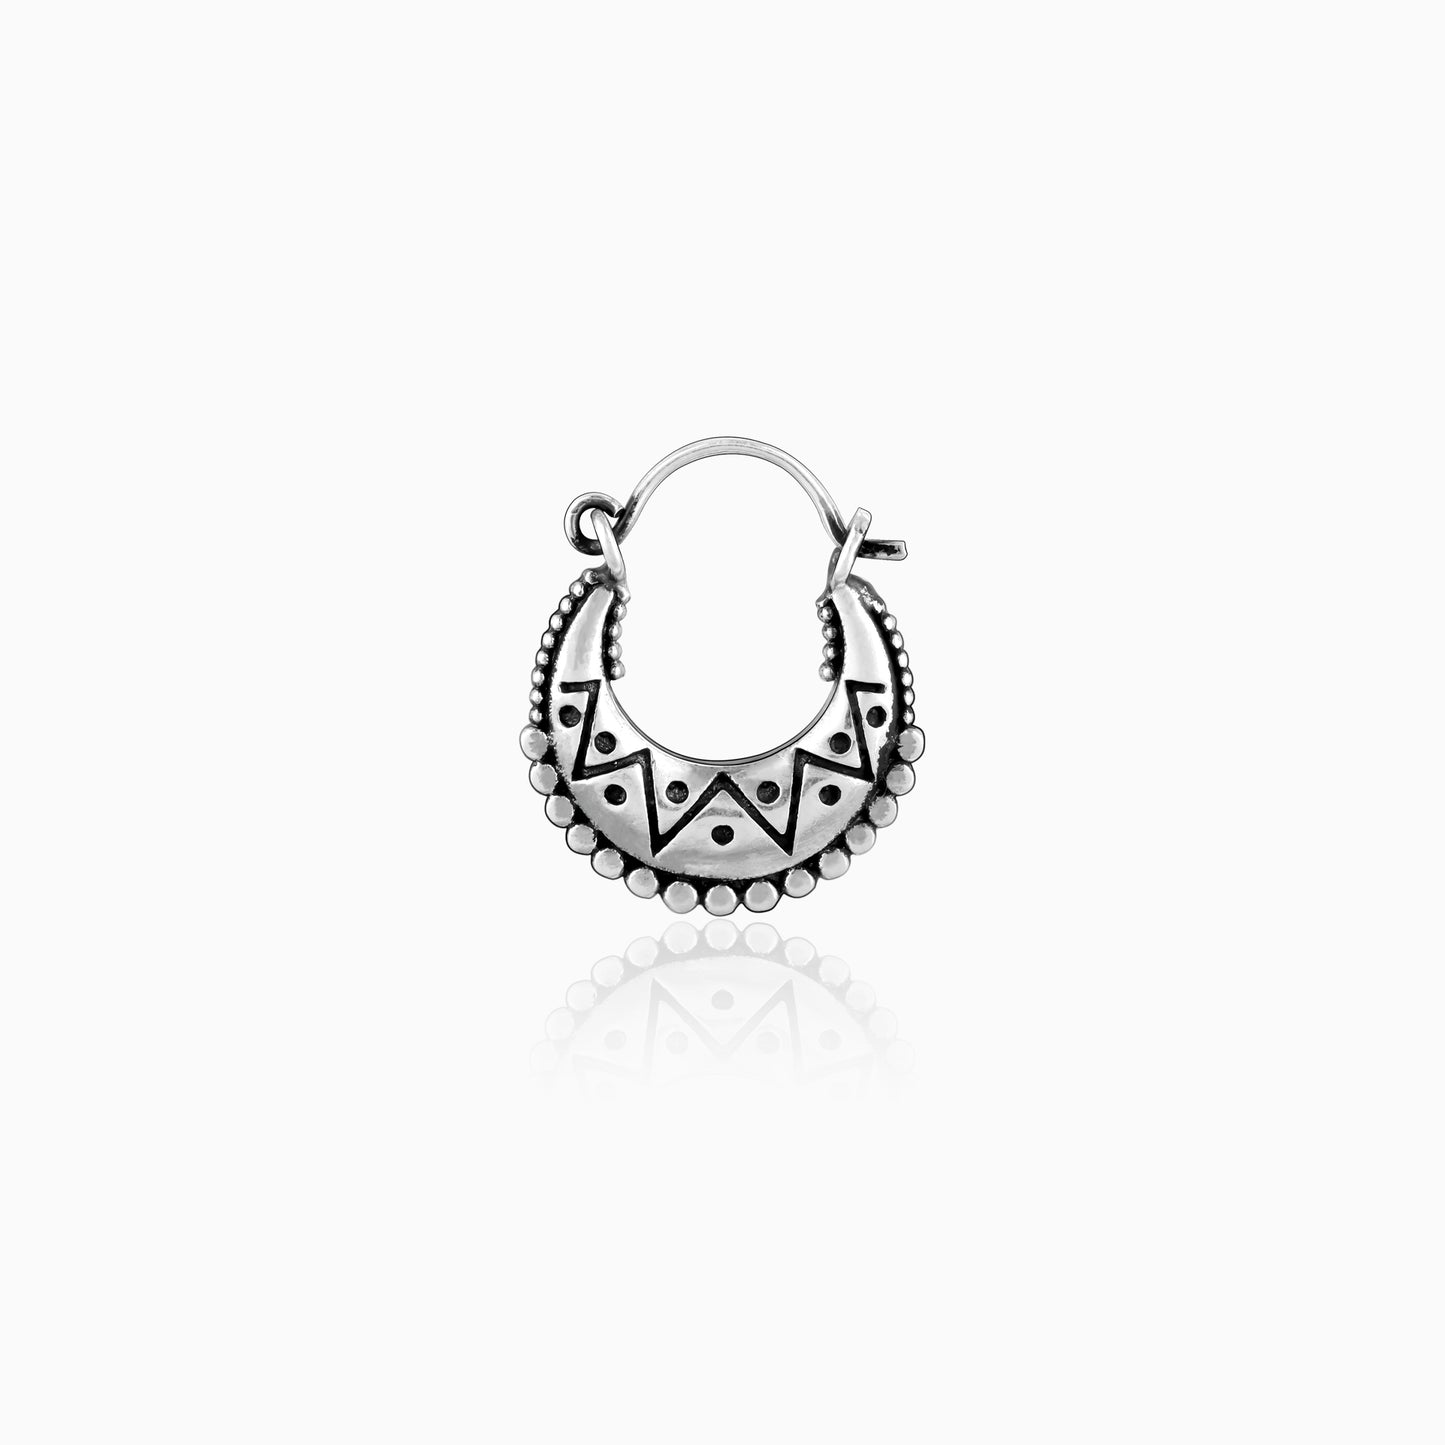 Oxidised Silver Tribal Nose Ring